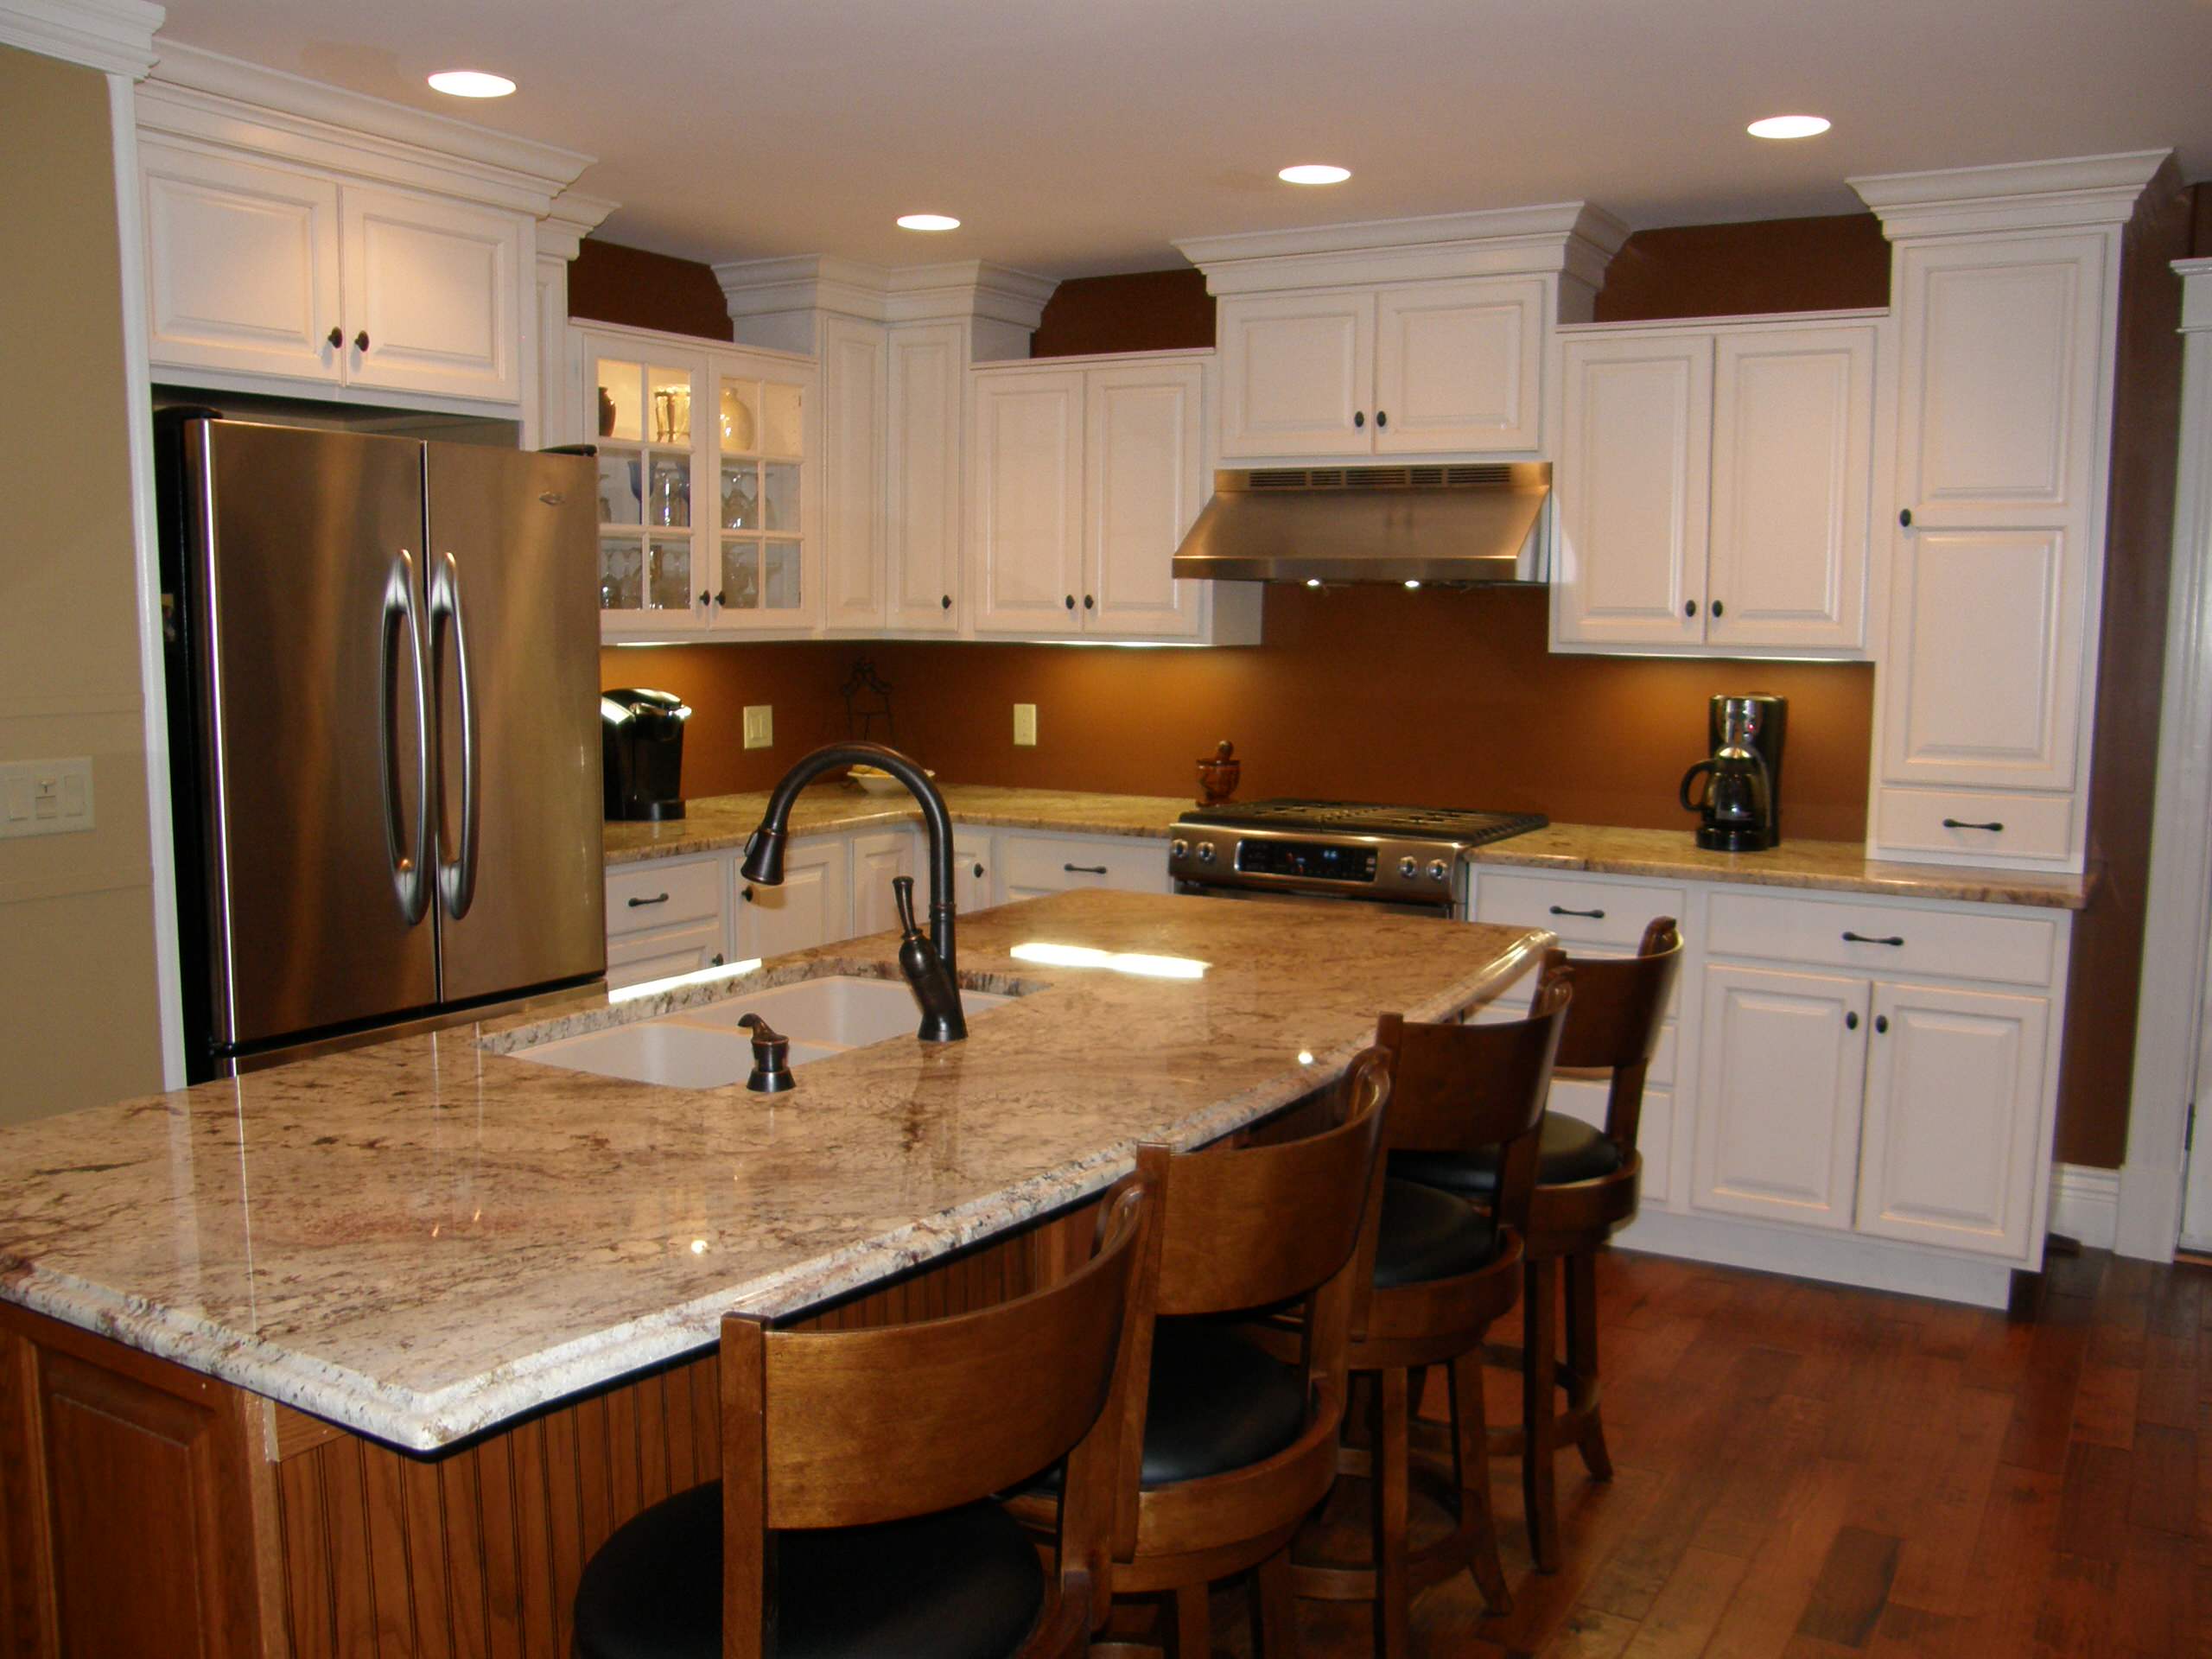 Soft Cream Cabinetry with Oak Island   Traditional   Kitchen   New ...